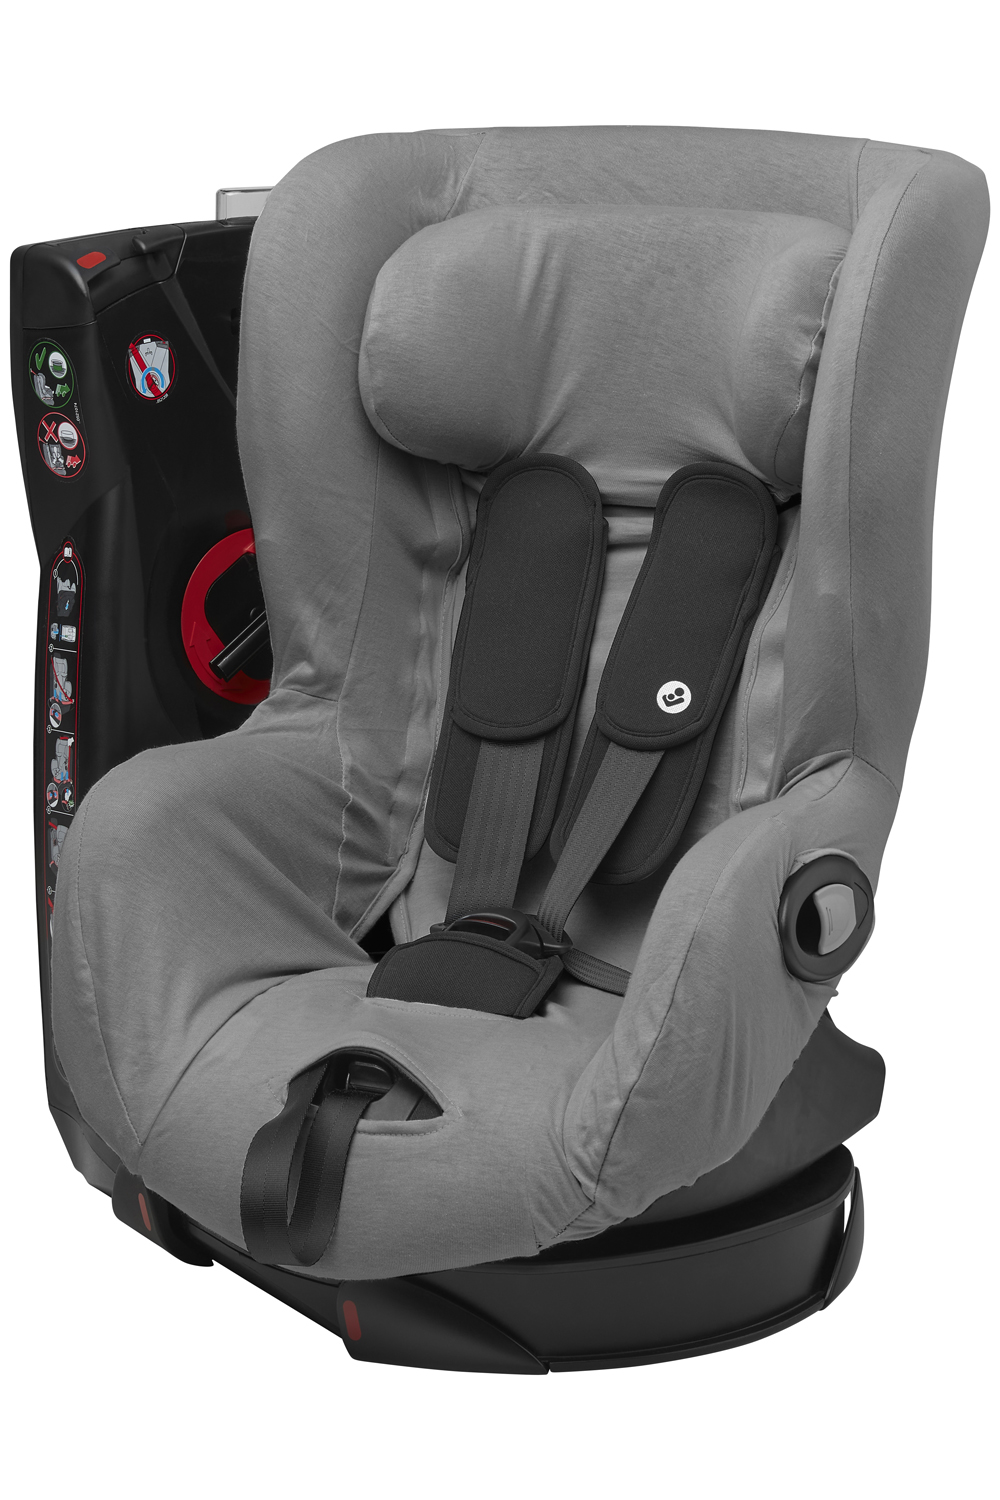 Car Seat Cover Basic Jersey - Grey - Group 1 With Headrest